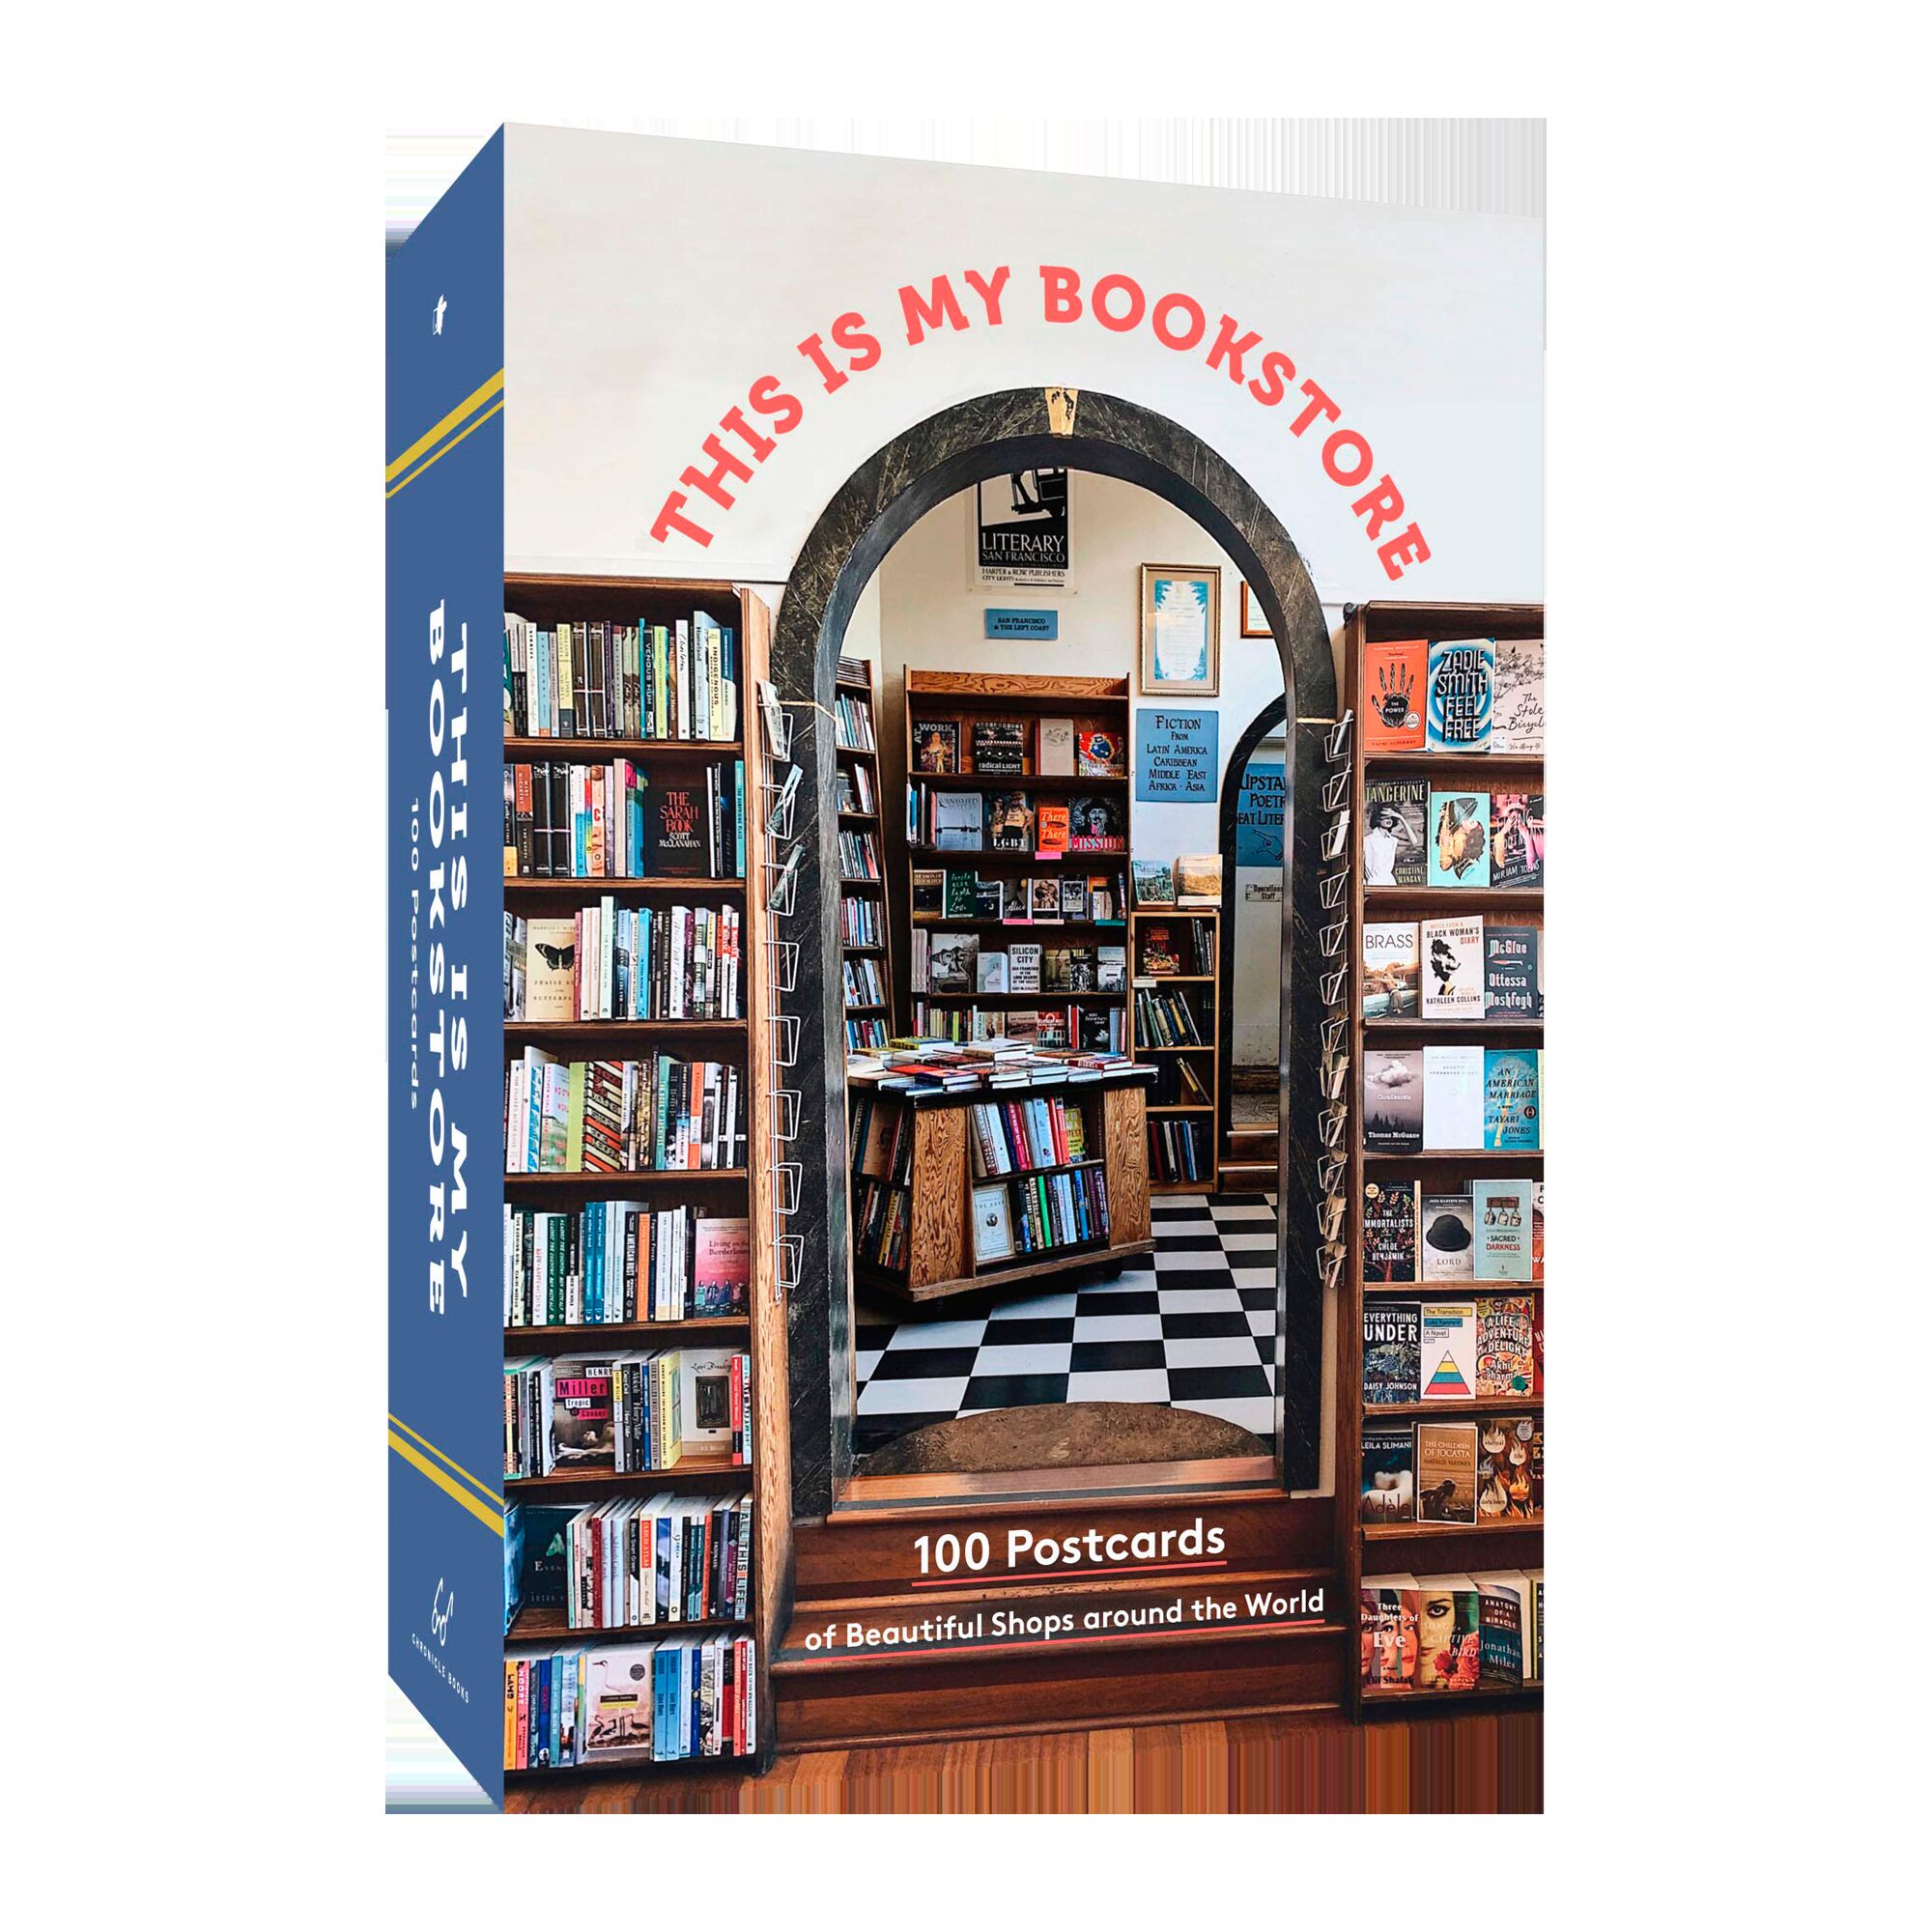 This Is My Bookstore: 100 Postcards of Beautiful Shops around the World